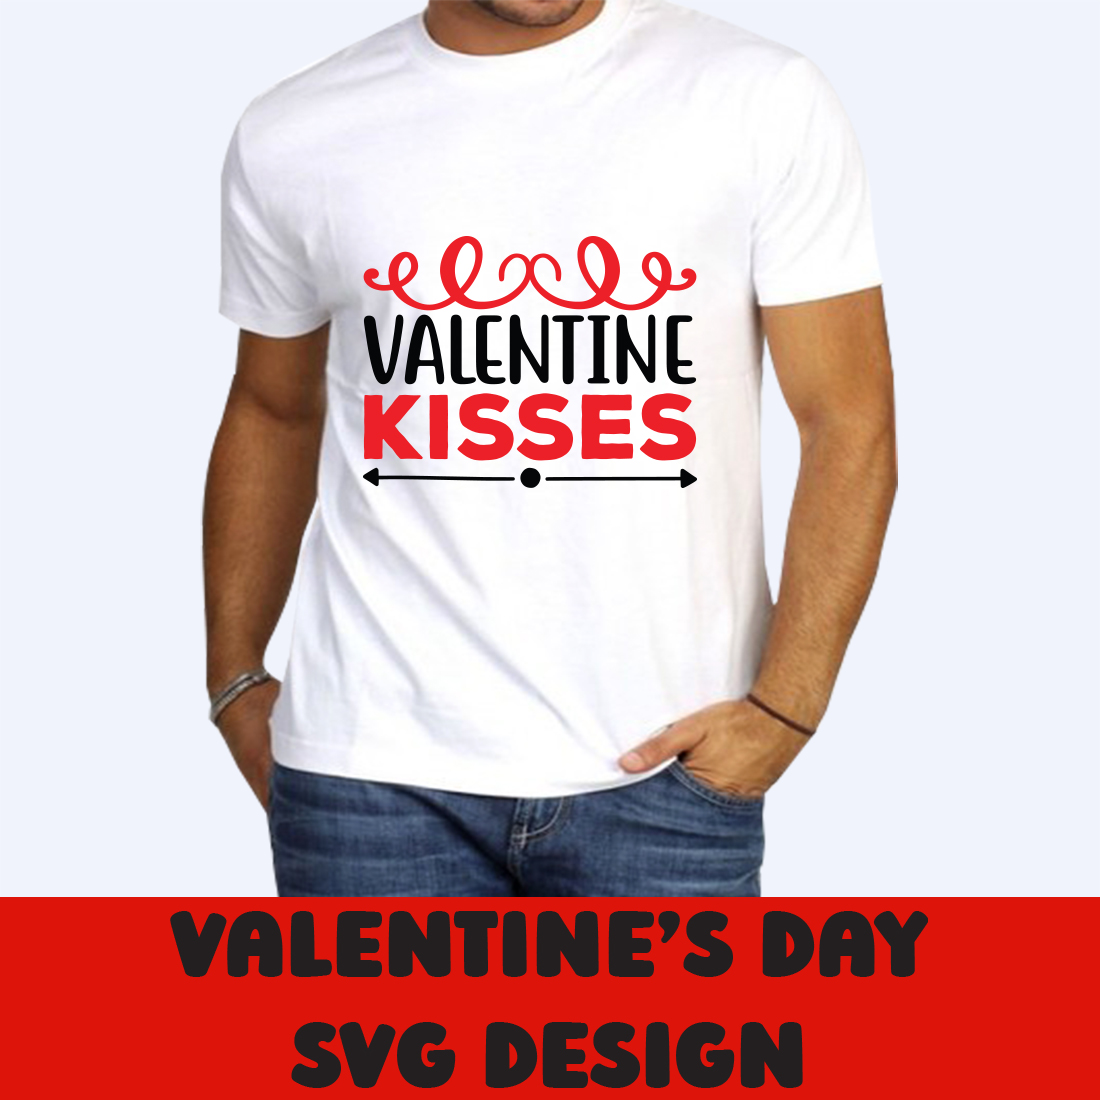 Image of a white t-shirt with a beautiful Valentine Kisses inscription